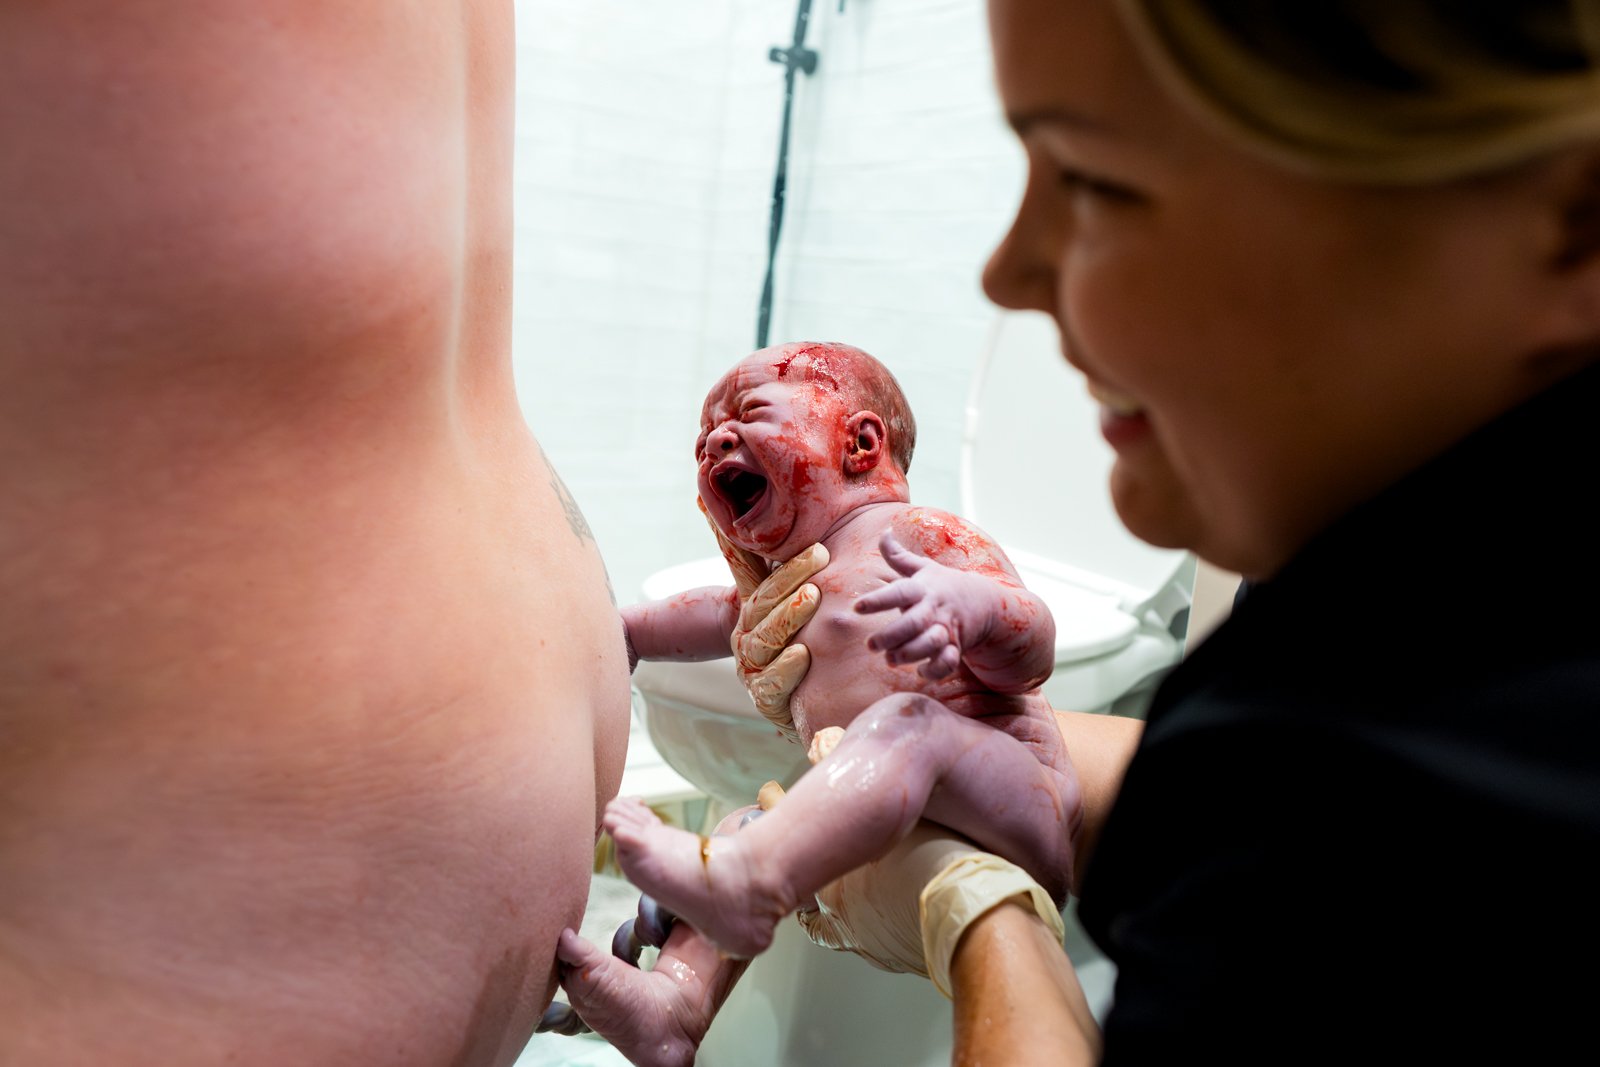 midwife holding up crying newborn baby just after birth